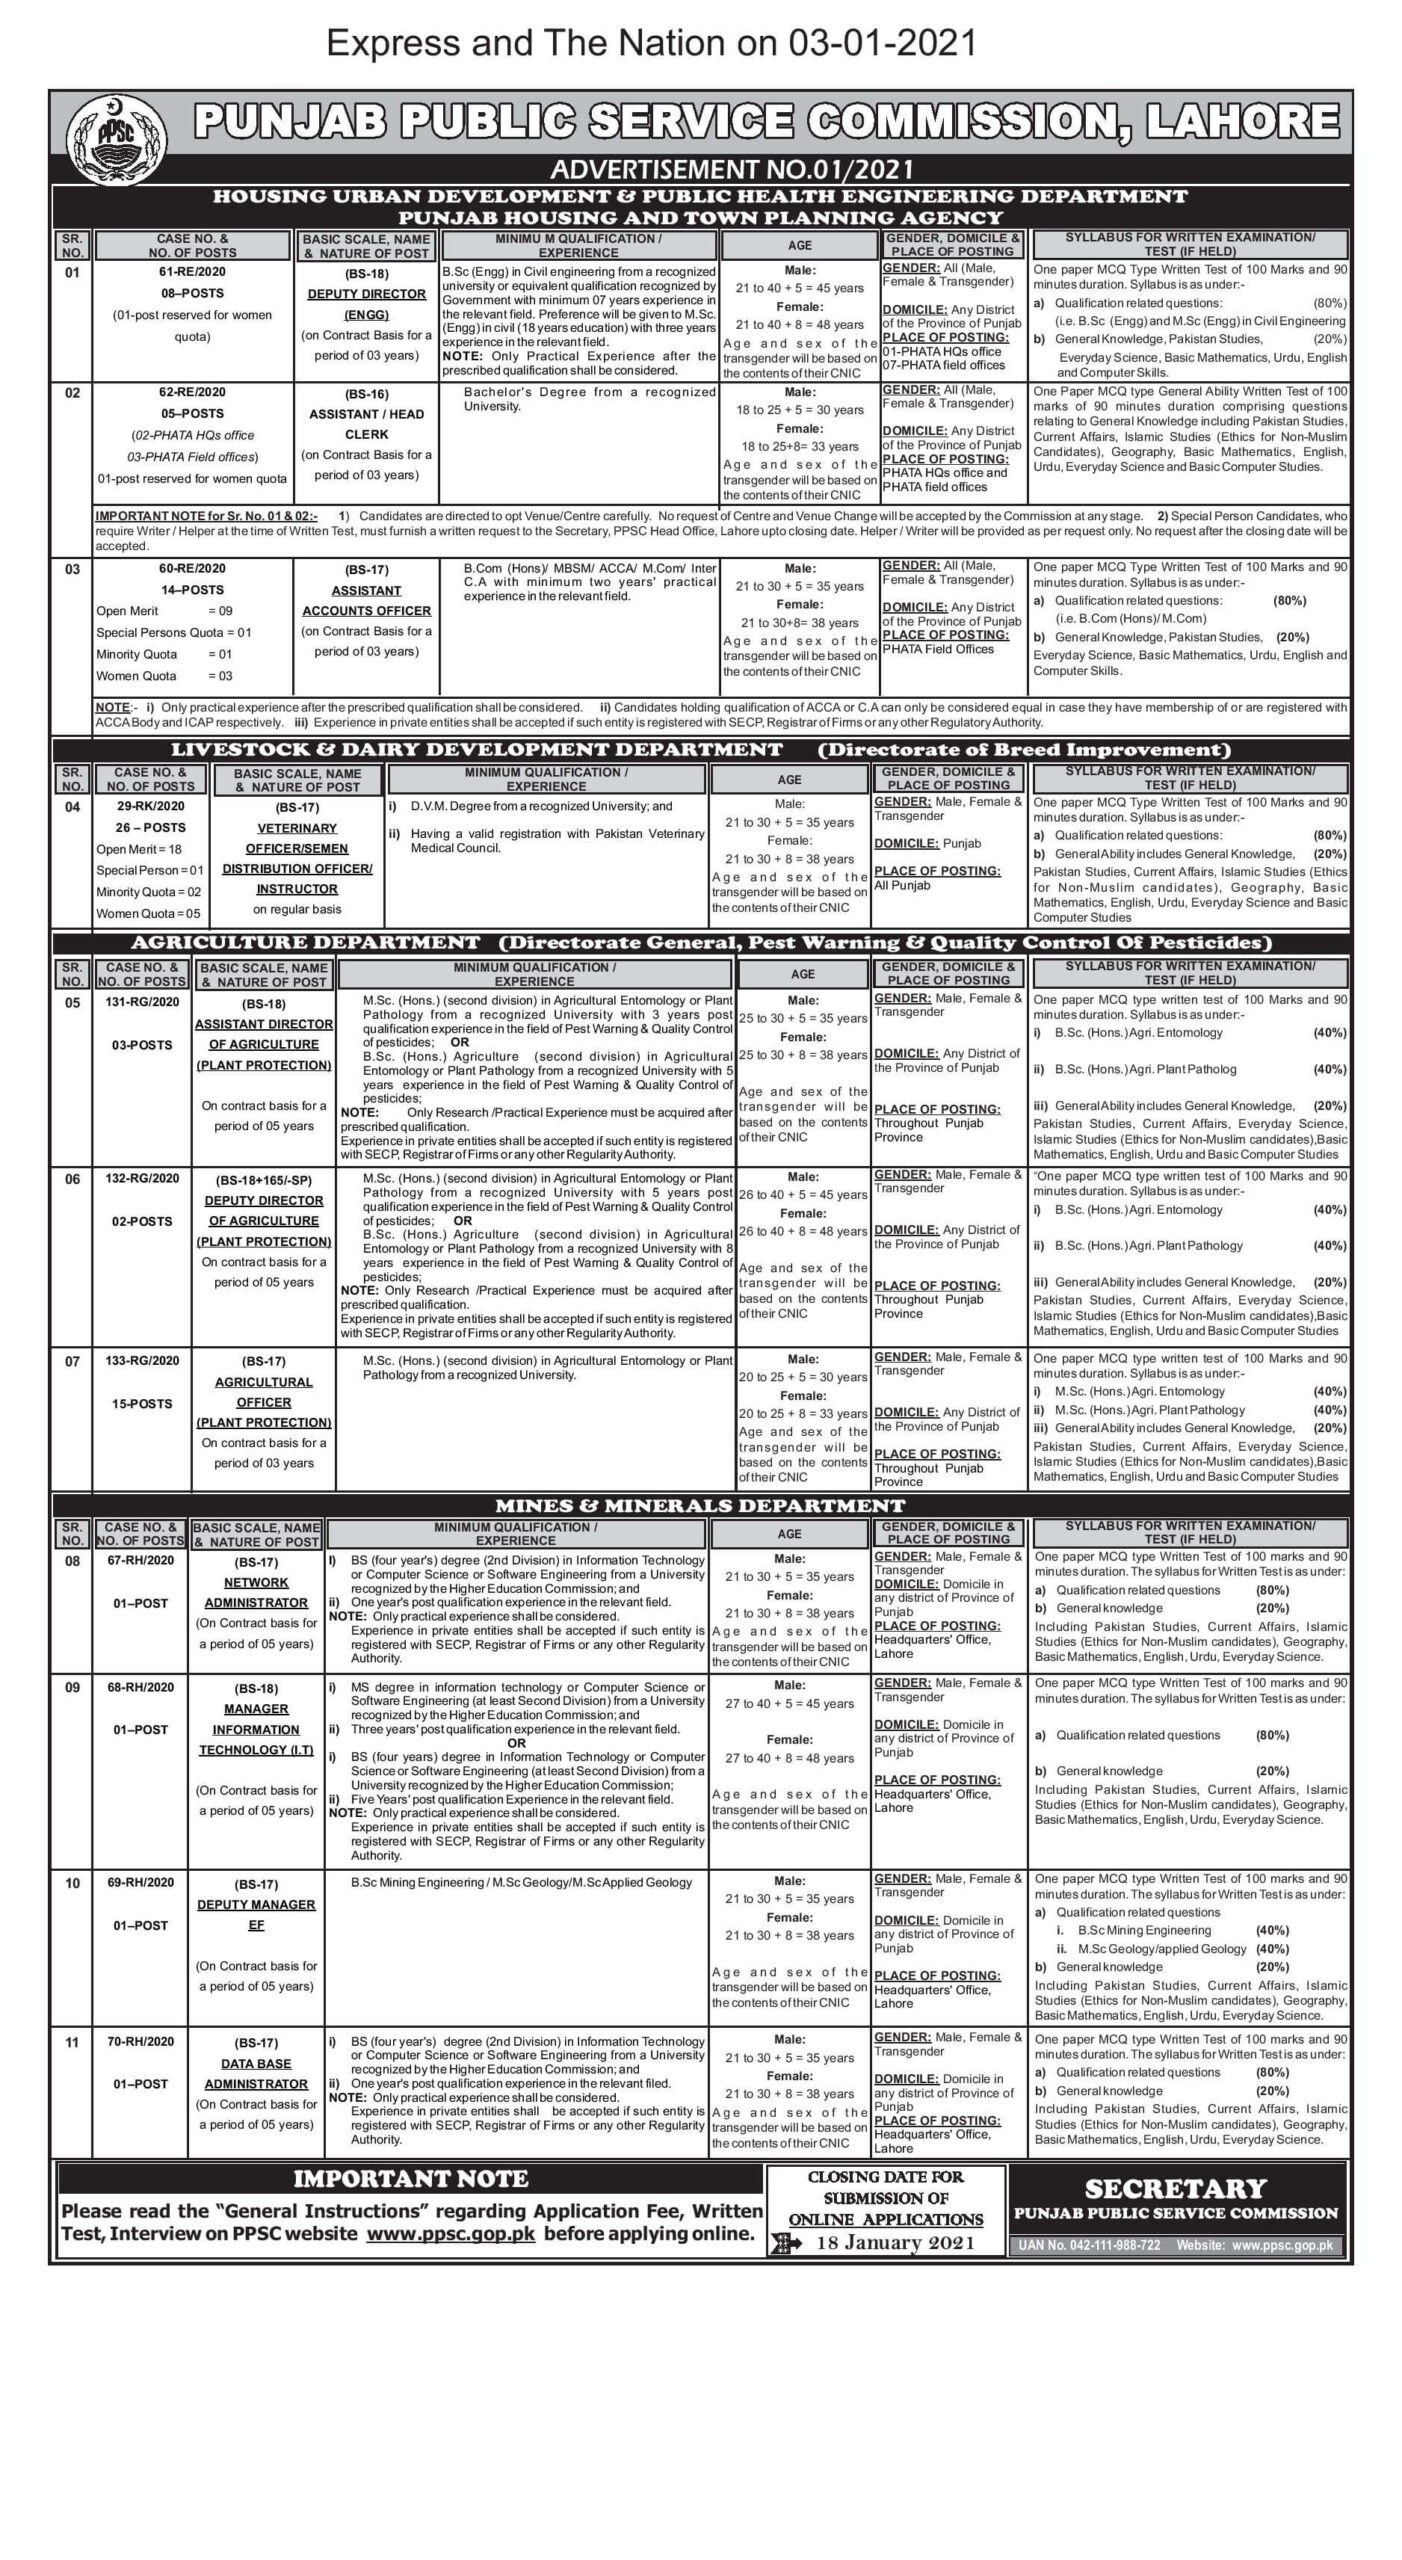 PPSC New 300 Jobs In Different Departments